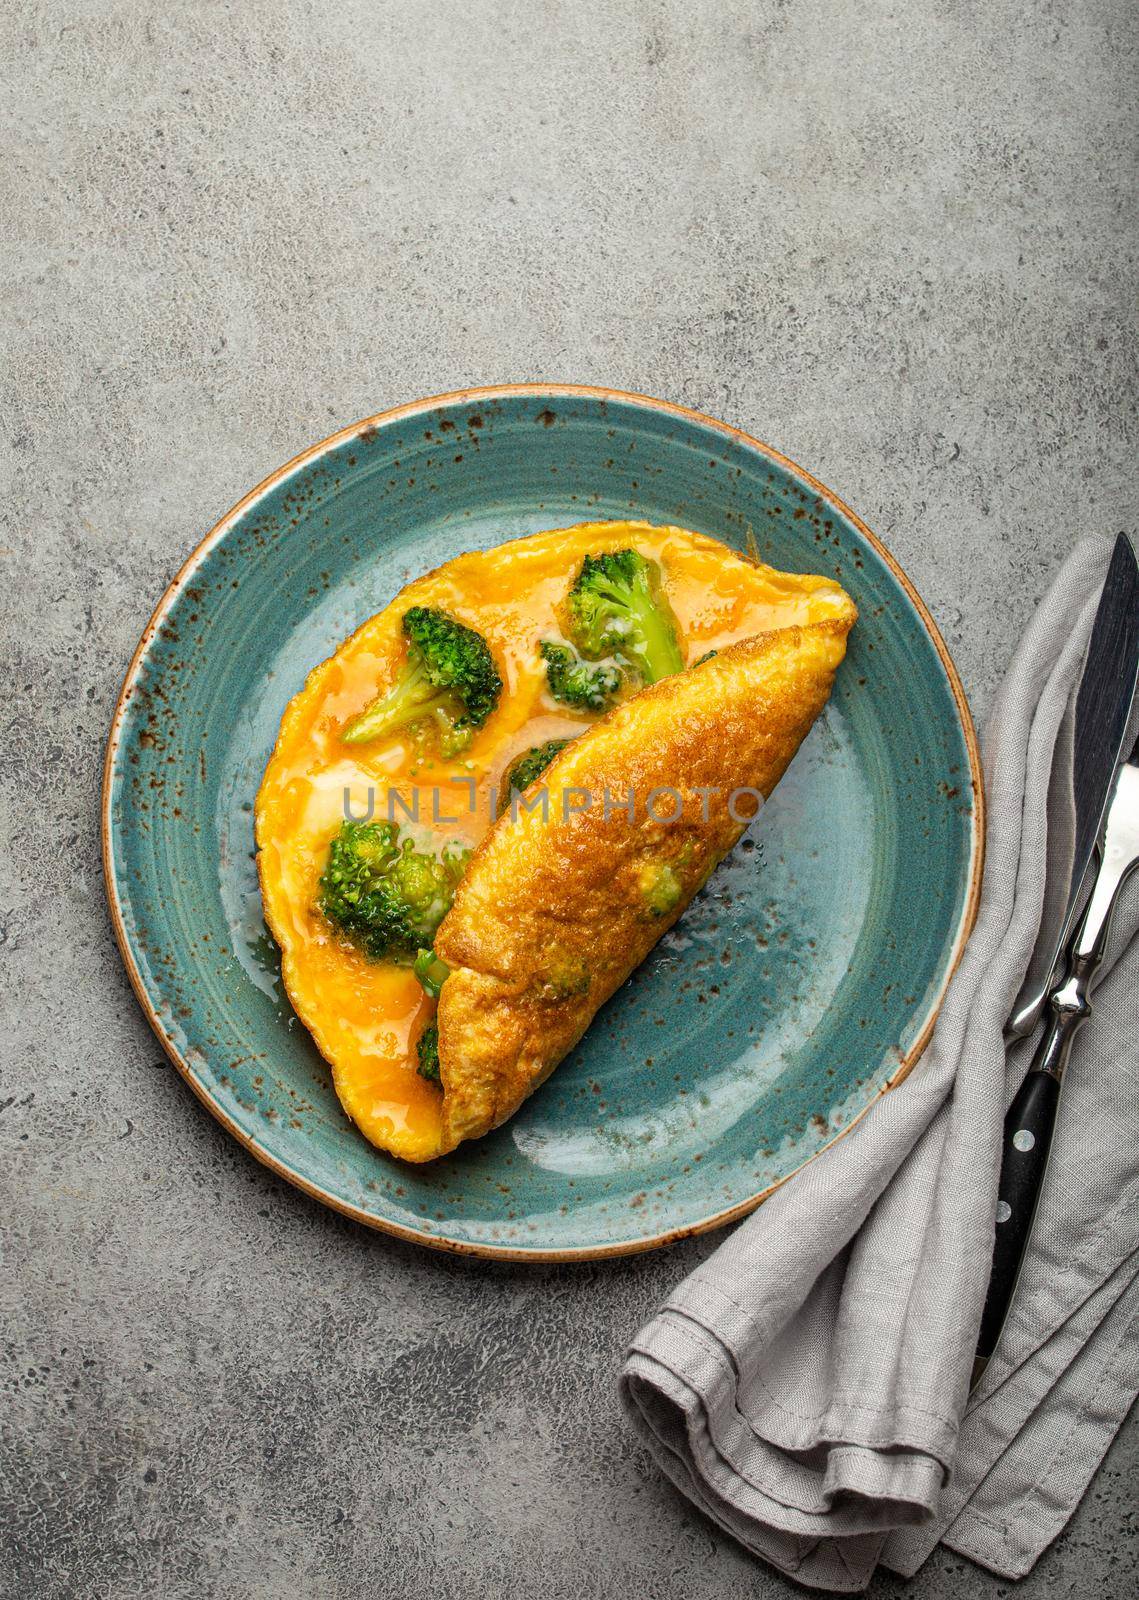 Healthy vegetarian egg omelette with green broccoli folded in half served on plate with fork and knife top view on gray stone concrete background table, diet and healthy clean eating concept